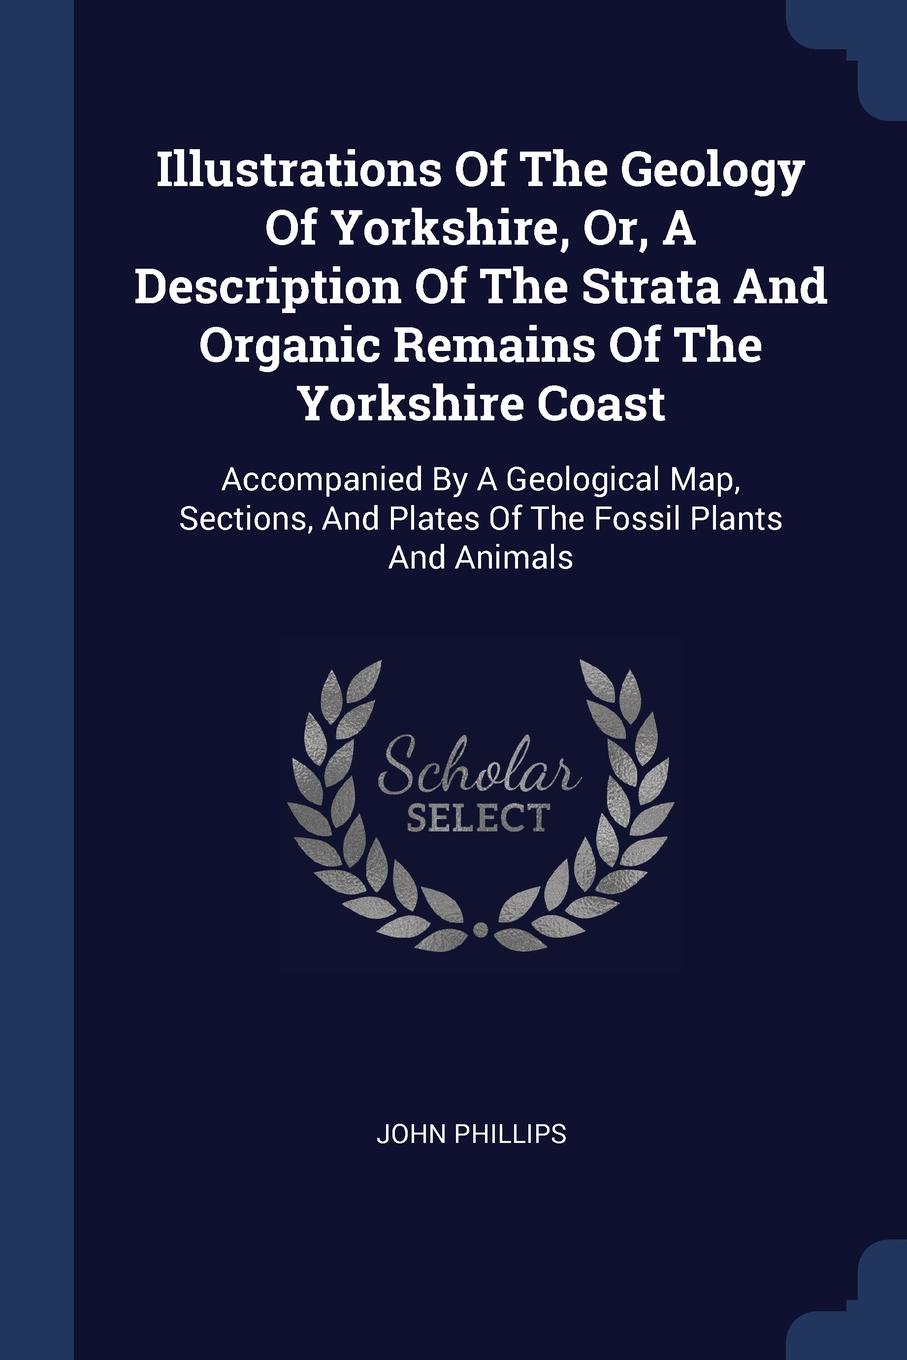 Illustrations Of The Geology Of Yorkshire, Or, A Description Of The Strata And Organic Remains Of The Yorkshire Coast. Accompanied By A Geological Map, Sections, And Plates Of The Fossil Plants And Animals